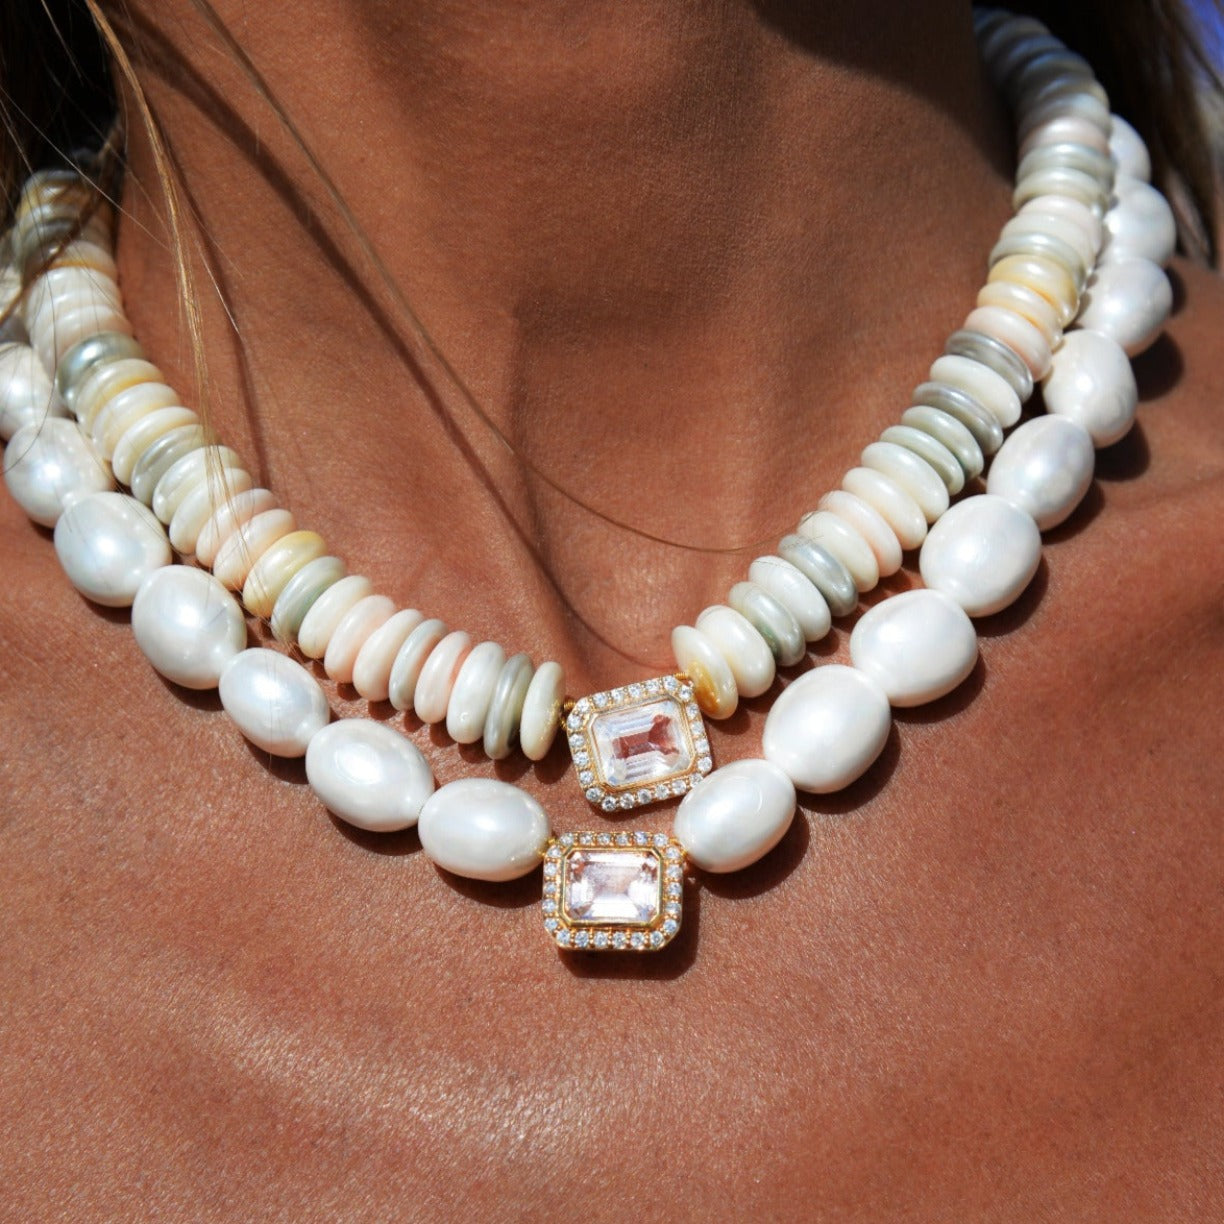 Molly necklace in large white shell pearls, 18-carat gold and crystal